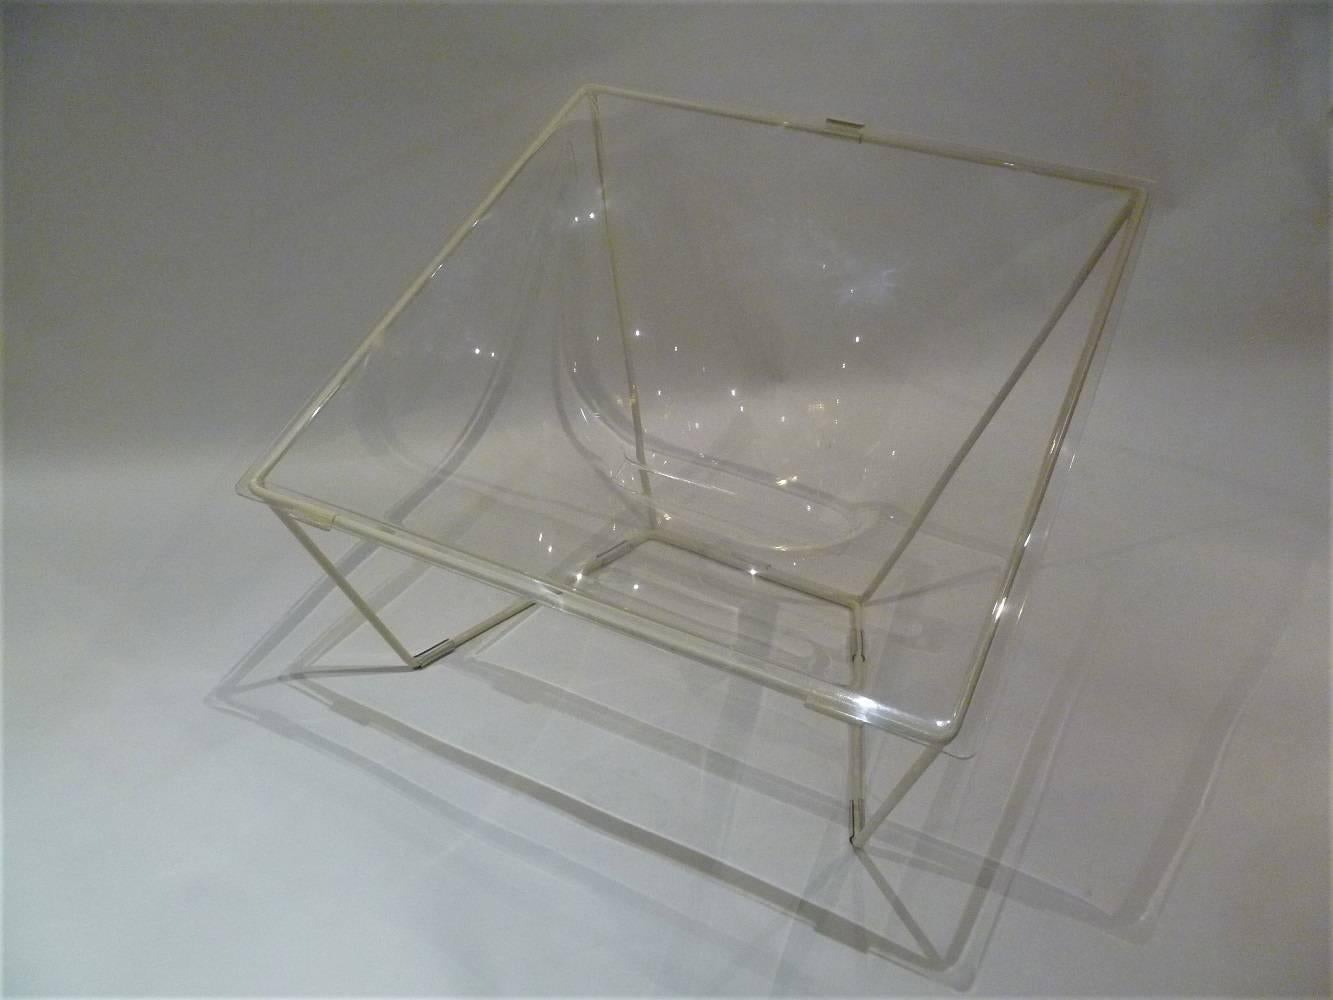 This Contour lounge chair was designed in the 1960s by David Colwell and manufactured by 4's Company Ltd. in the United Kingdom. The process required to hand stretch a hot flat perspex or acrylic sheet to be clipped onto a steel rod frame. Colwell's